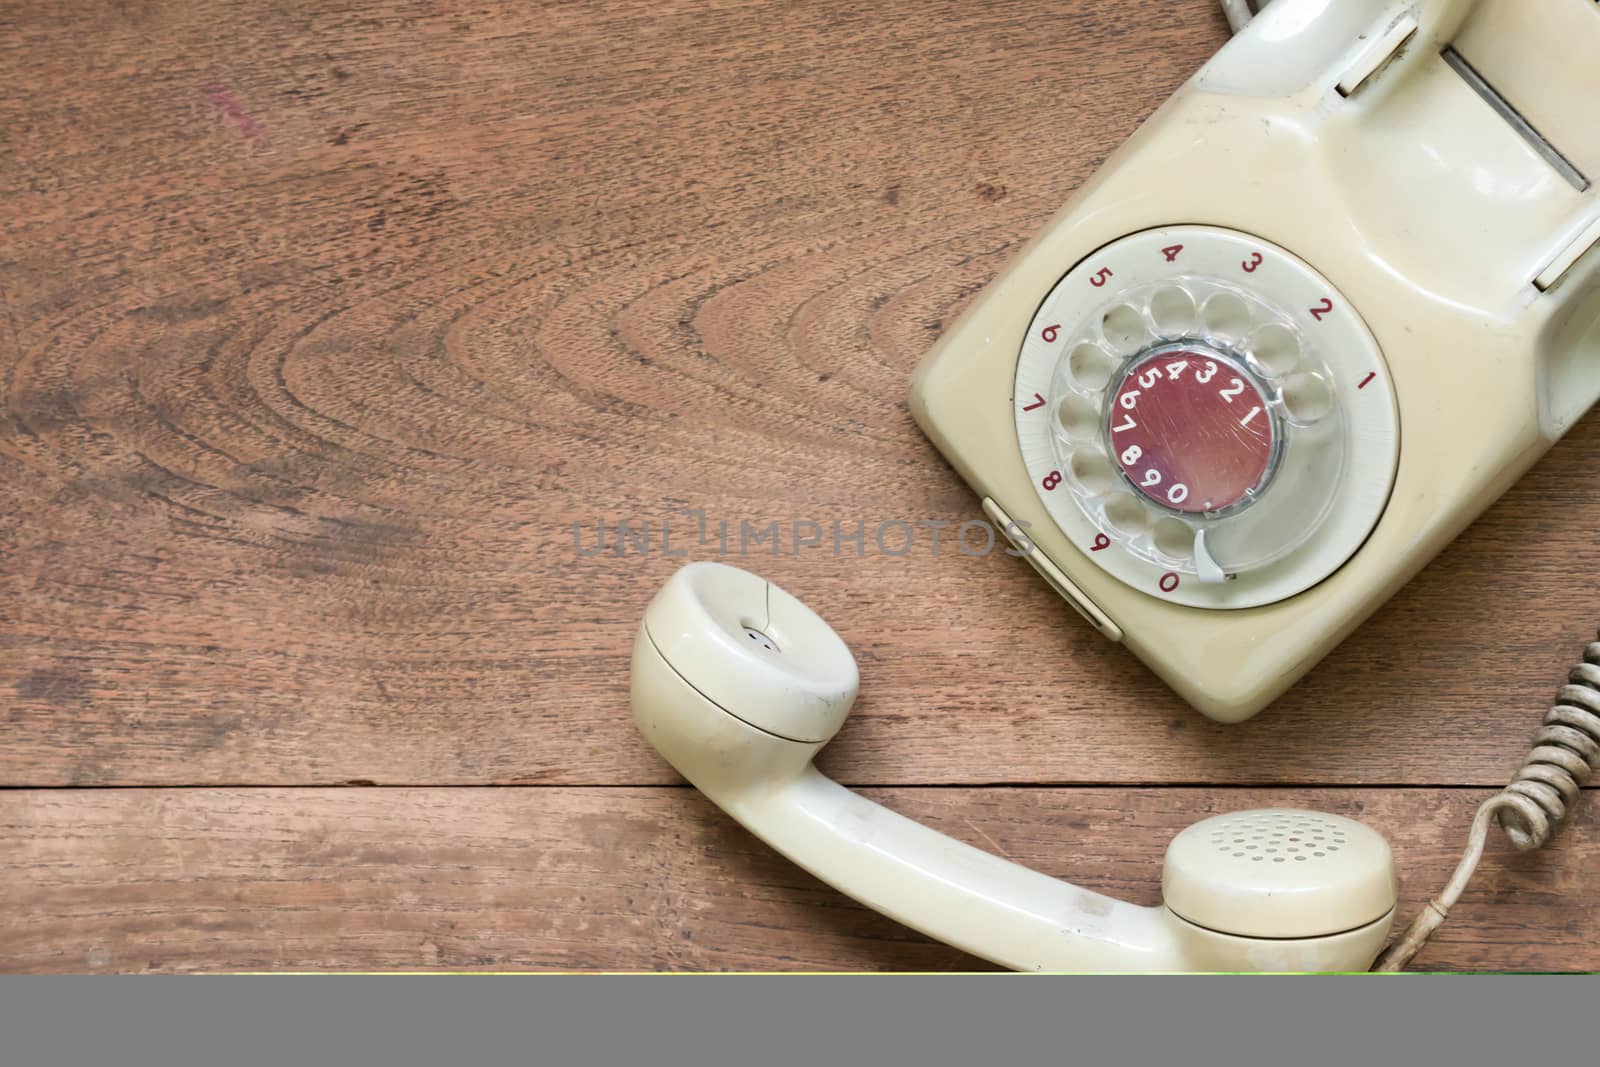 vintage telephone on wooden table background.